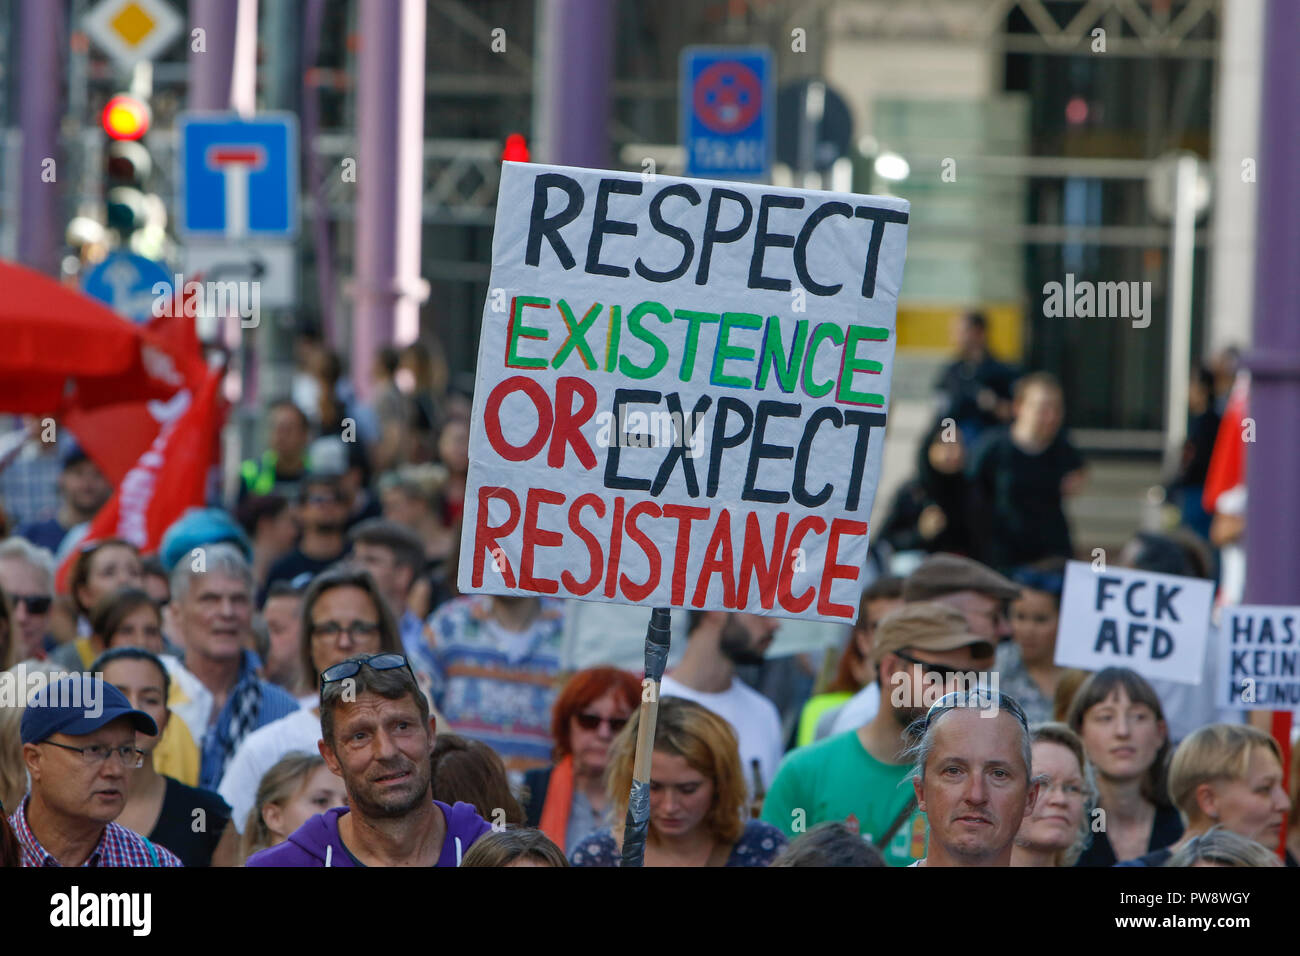 Frankfurt, Germany. 13th October 2018. A protester holds a poster that reads 'Respect existence or expect resistance'. Over 3,500 people marched through Frankfurt, to protest against  racism and for tolerance. They where accompanied by many local bands, performing on the way and at the rallies. The protest was part of several other protests against racism in Germany on the same day. Credit: Michael Debets/Alamy Live News Stock Photo